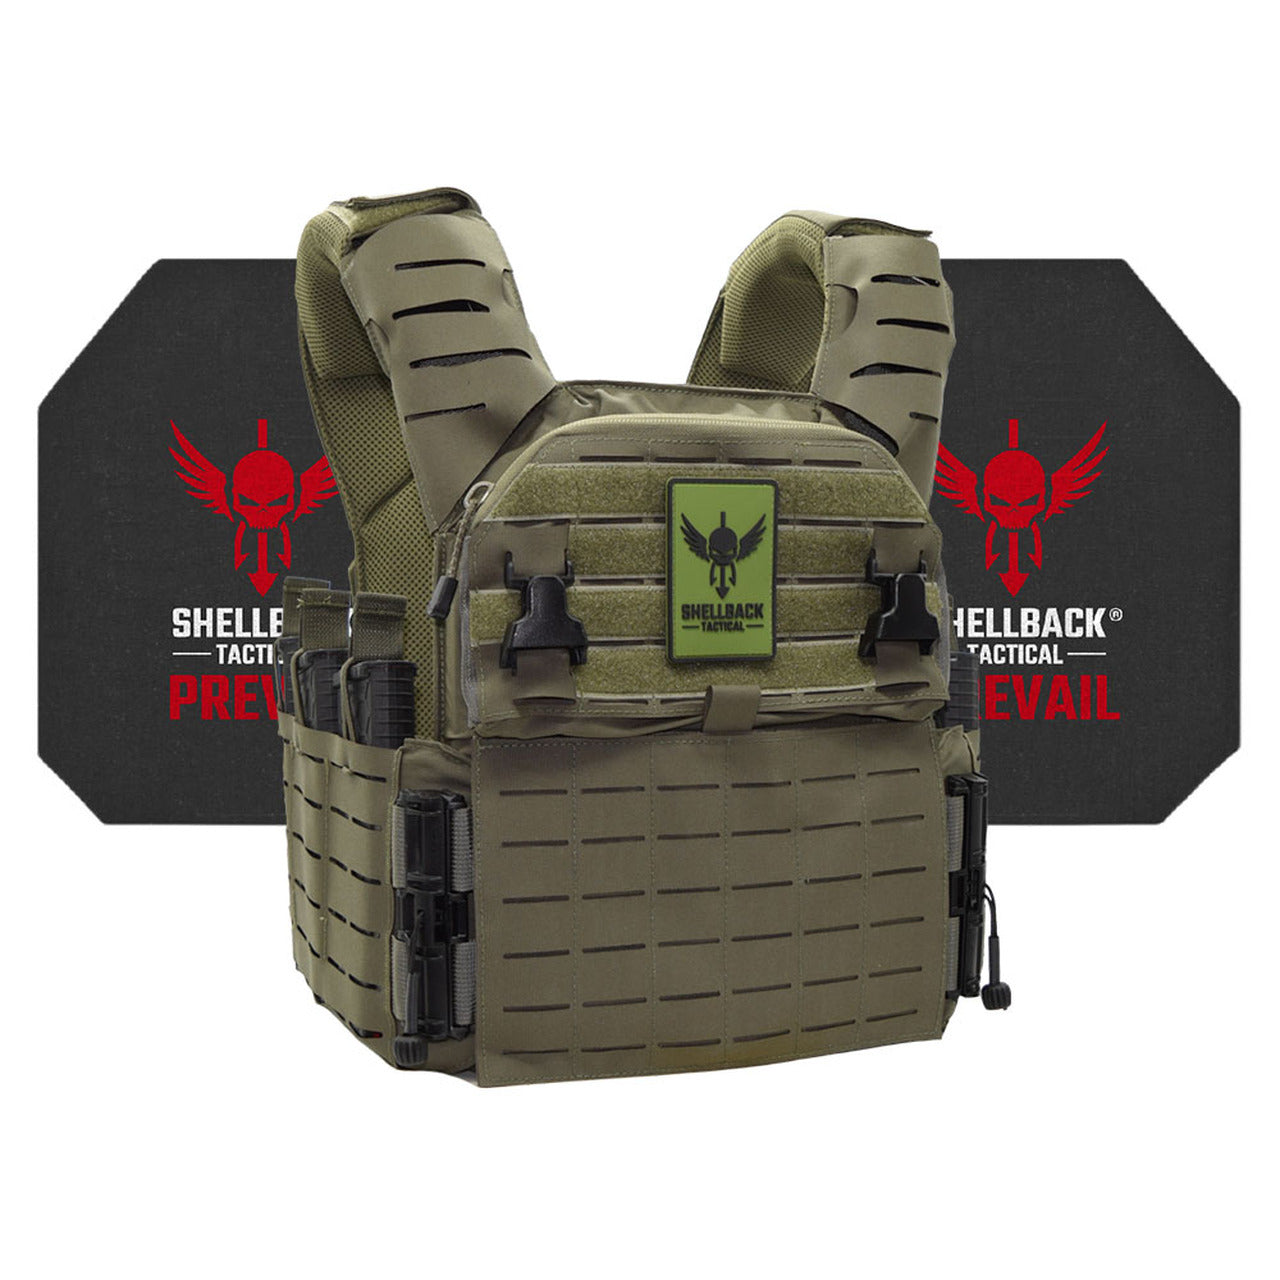 A Shellback Tactical Banshee Elite 3.0 Active Shooter Kit with Level IV Model 4S17 Armor Plates and a red logo on it.